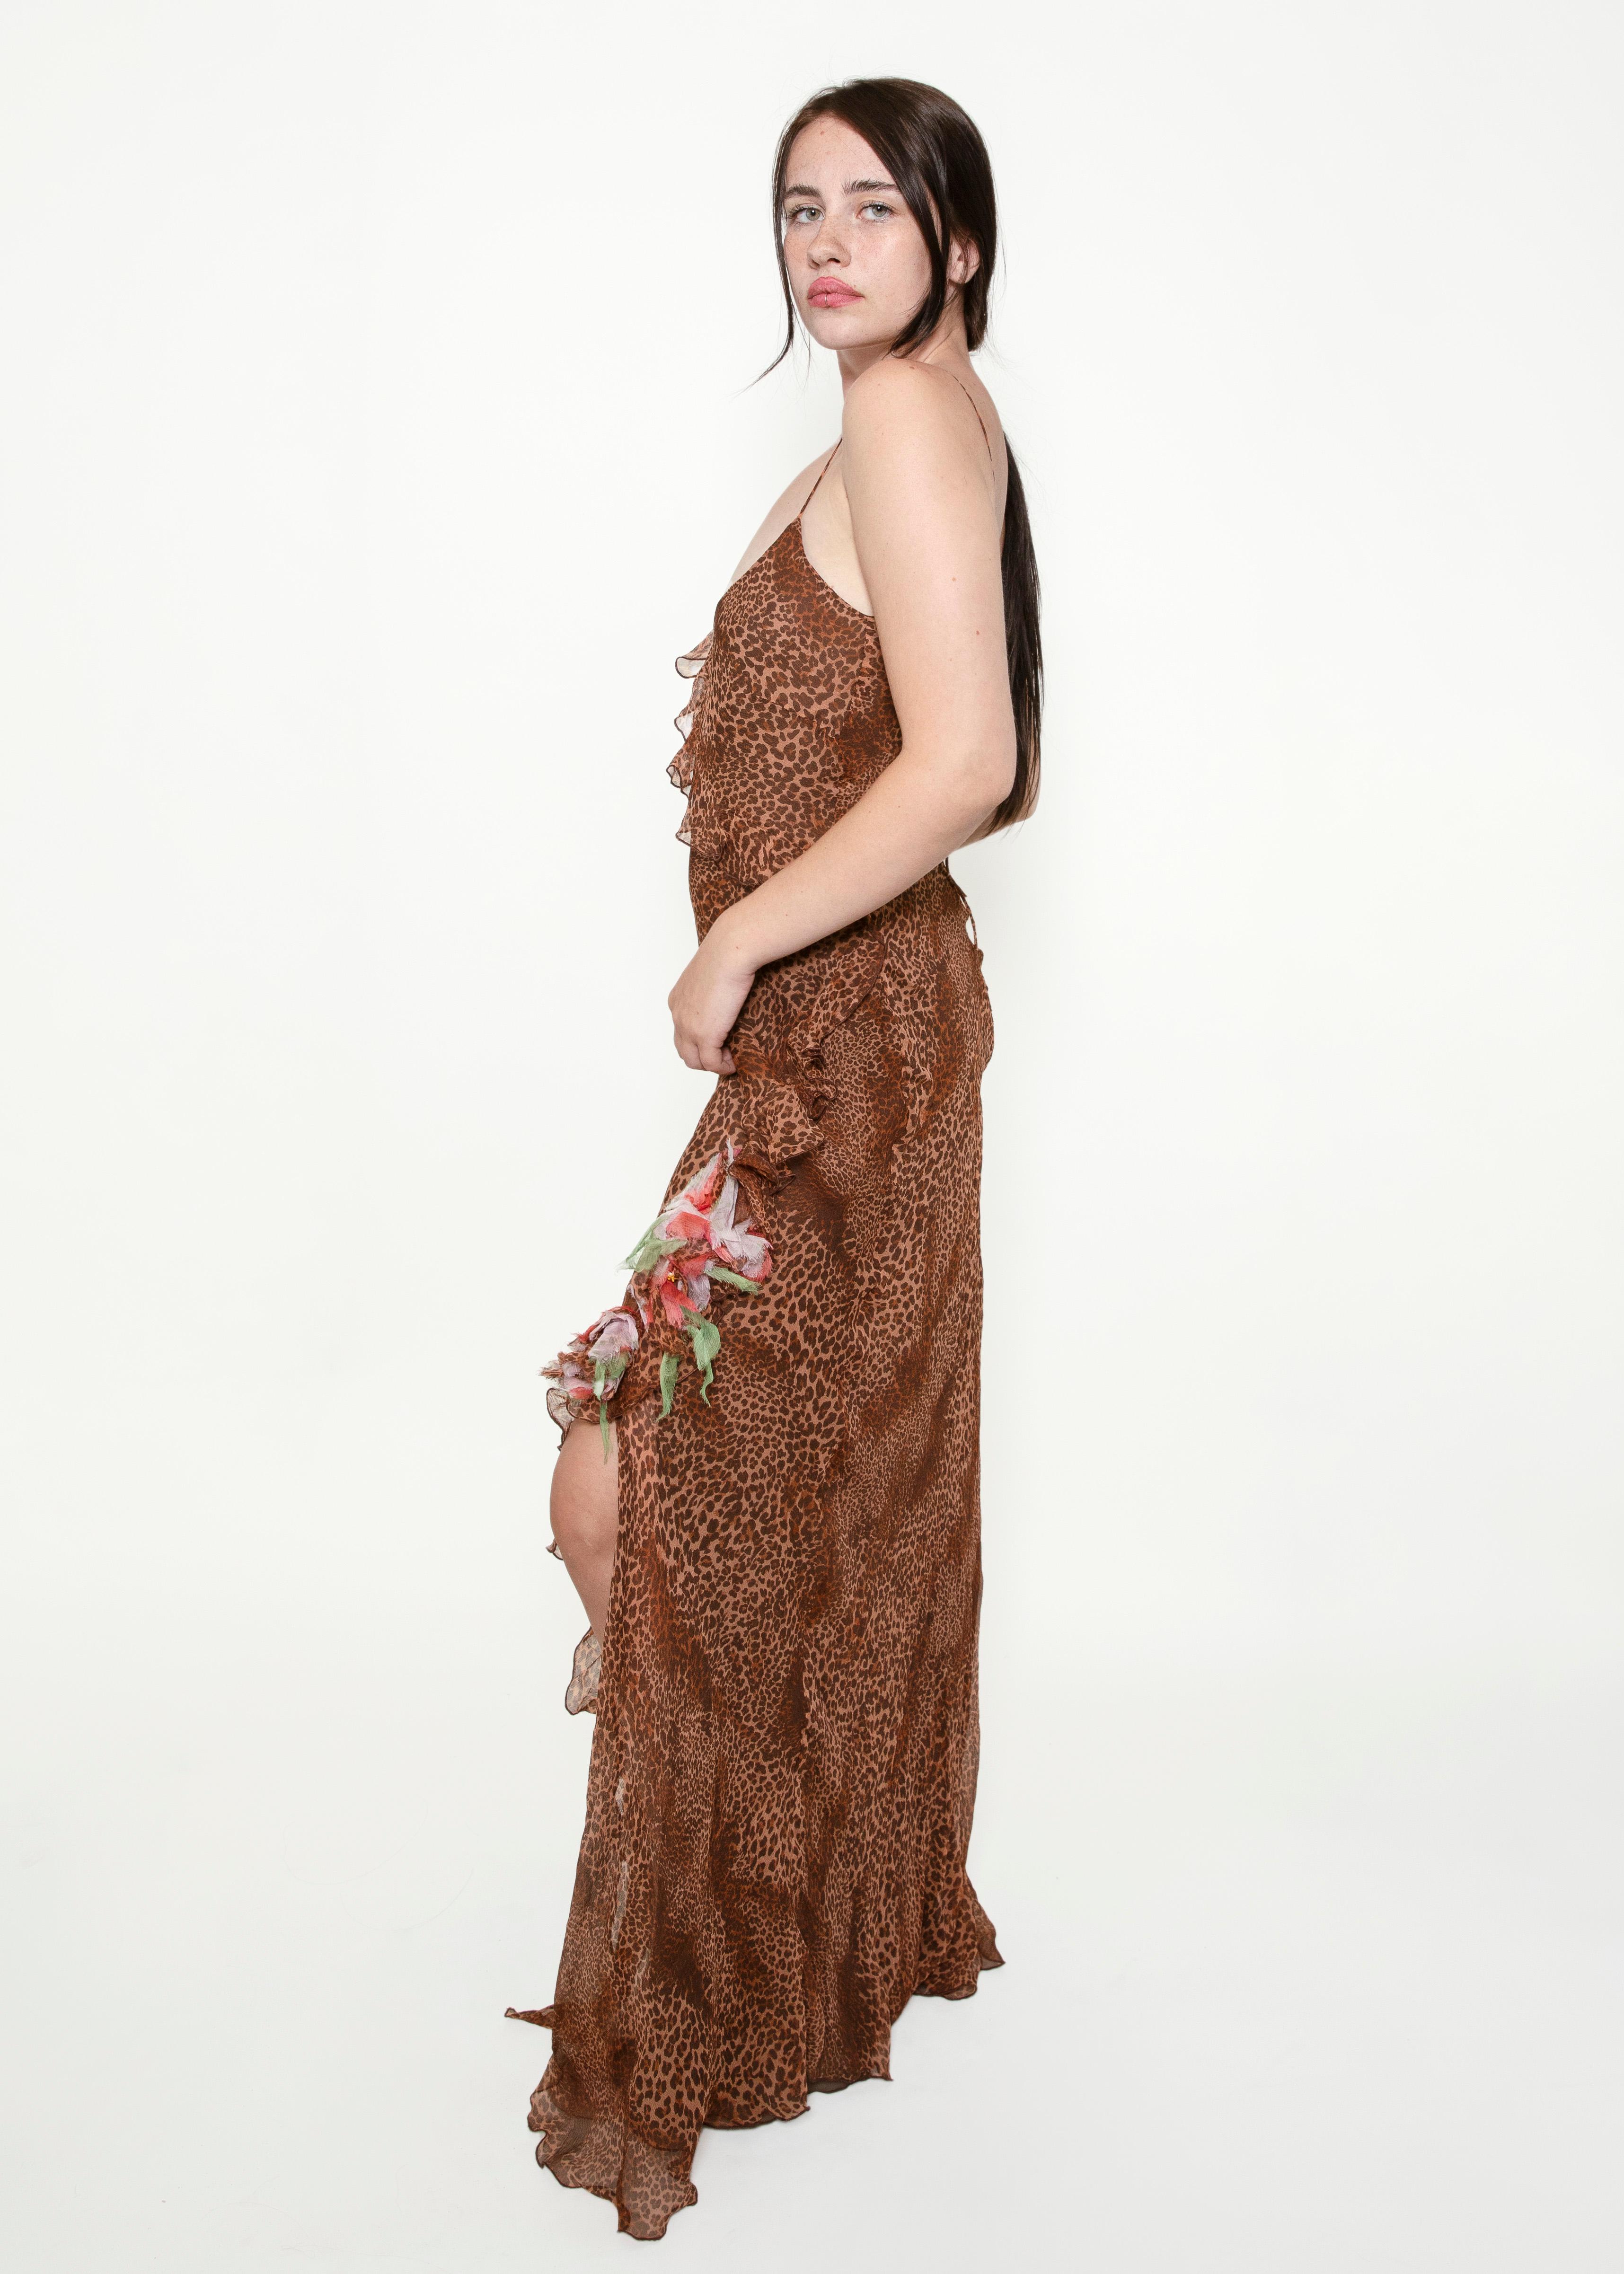 Blumarine Leopard Print Silk Chiffon Dress In Excellent Condition For Sale In Los Angeles, CA